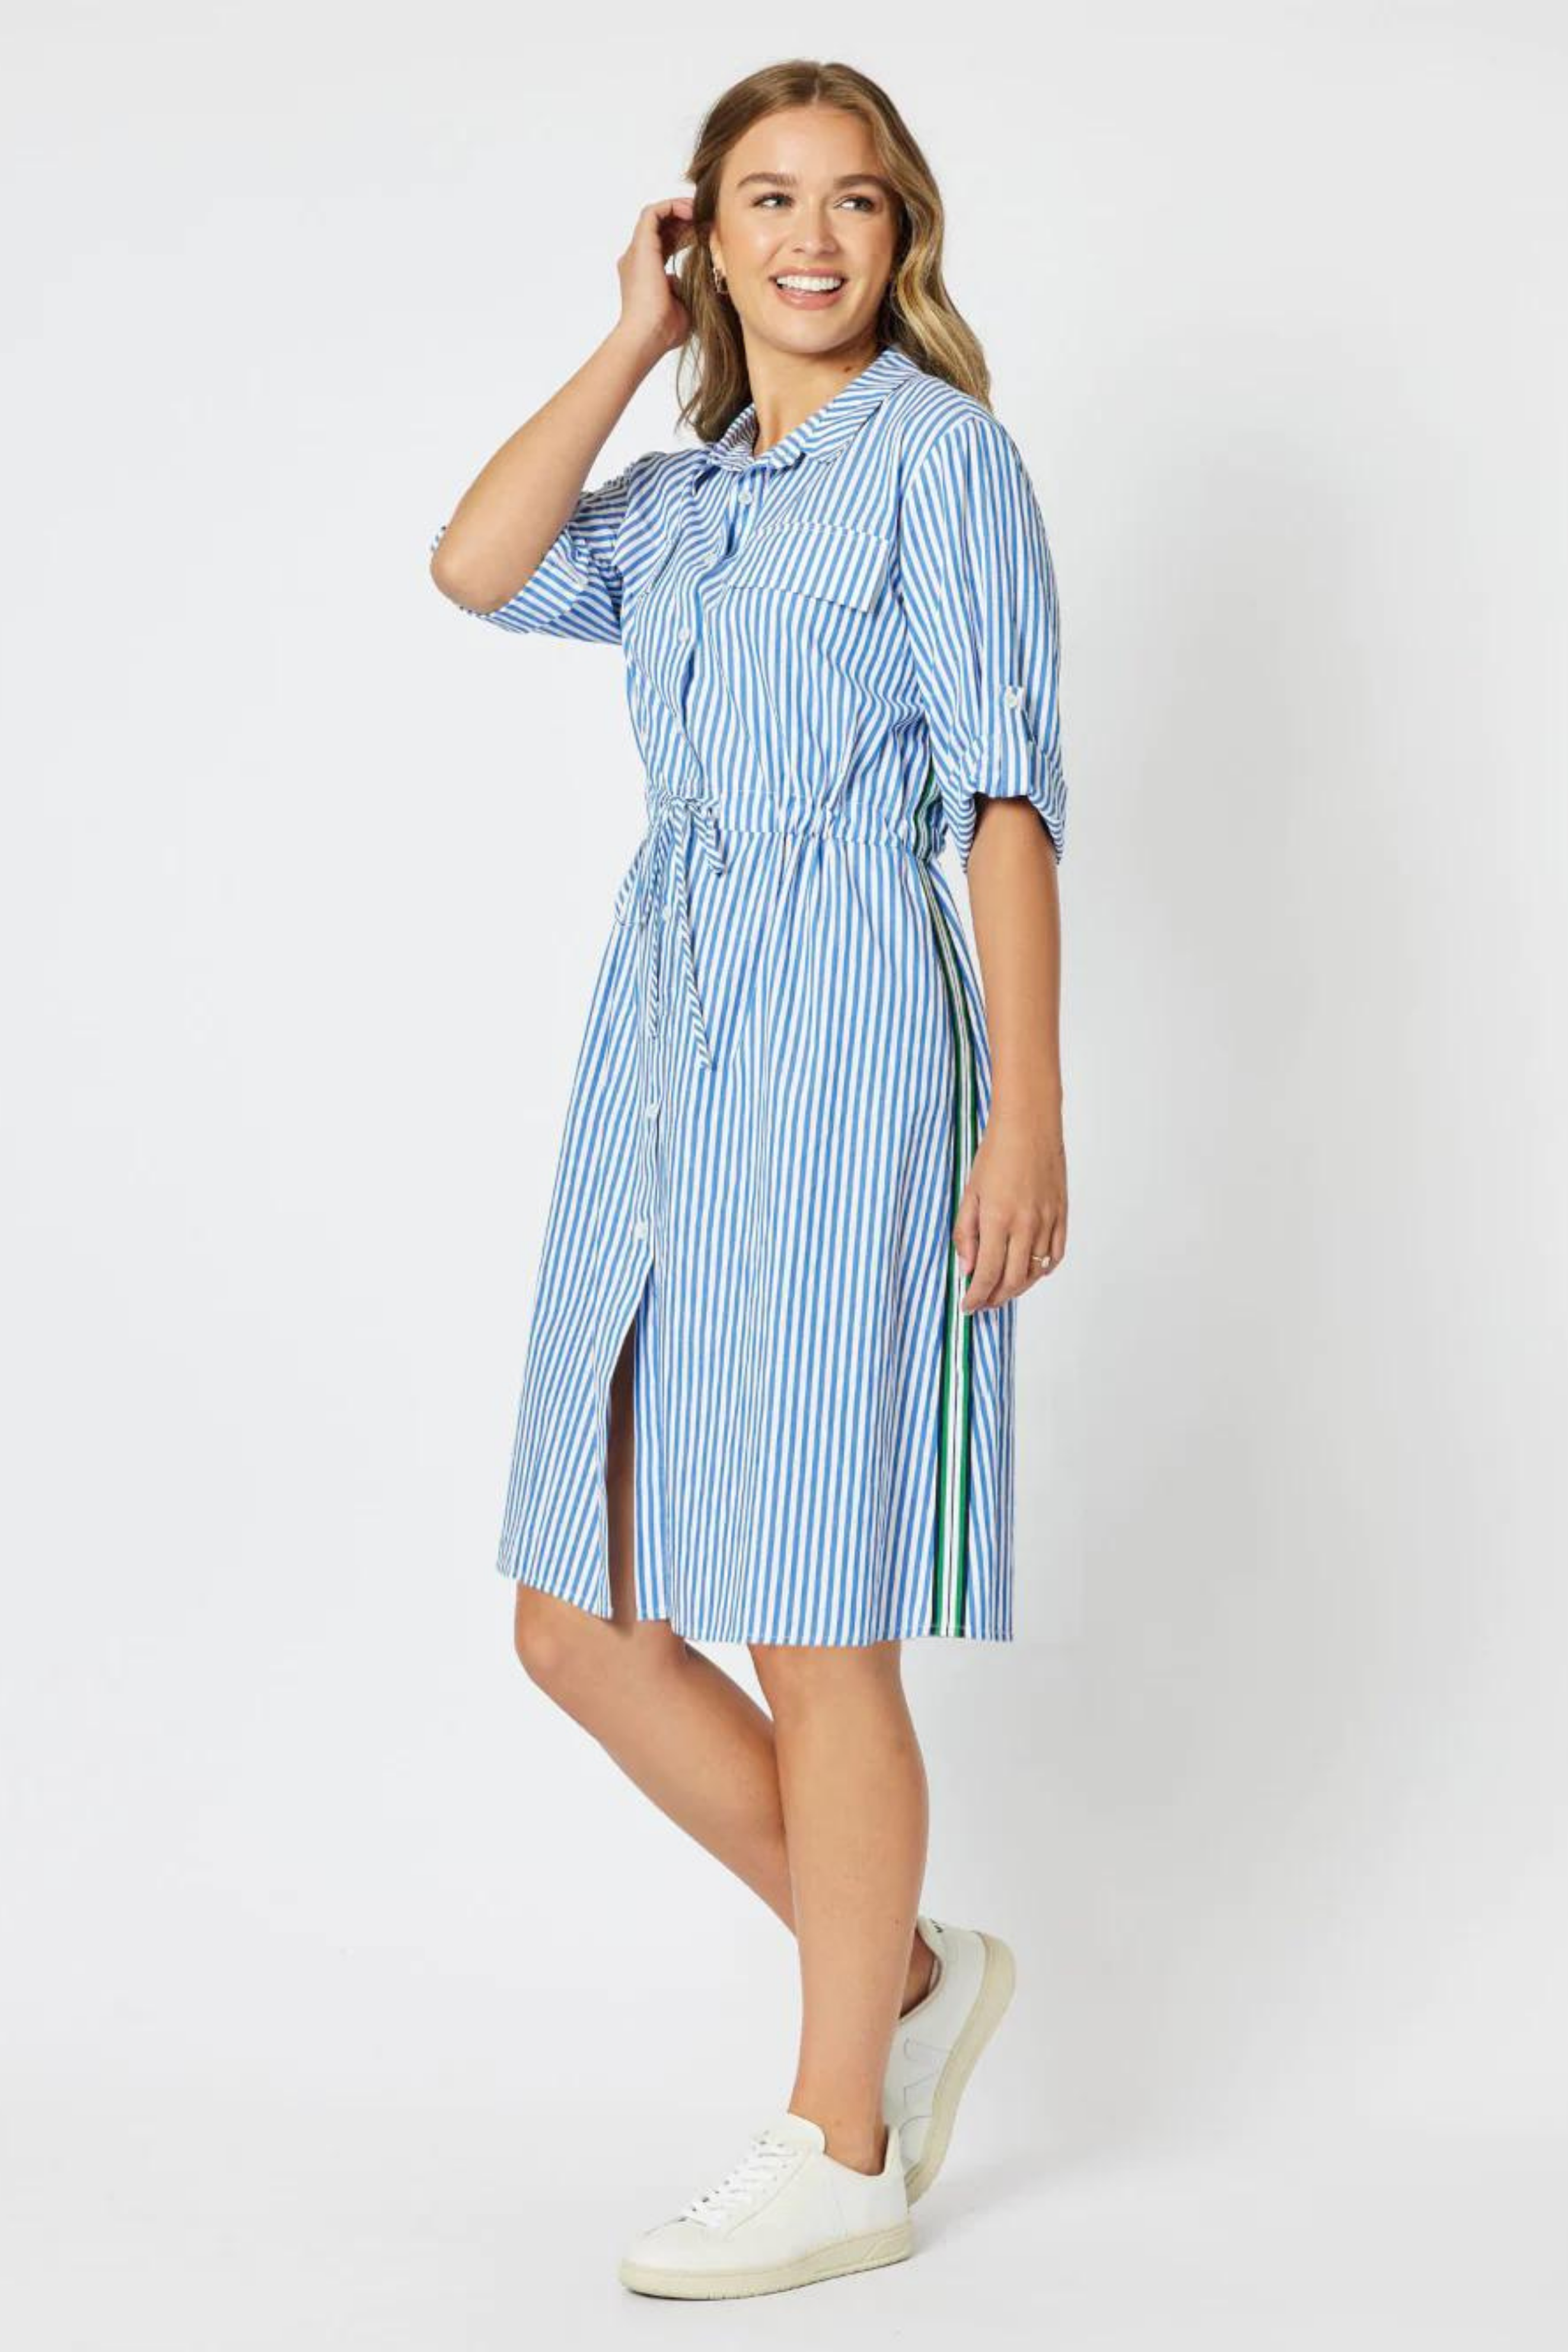 Hadley Stripe Shirt Dress in Blue and White